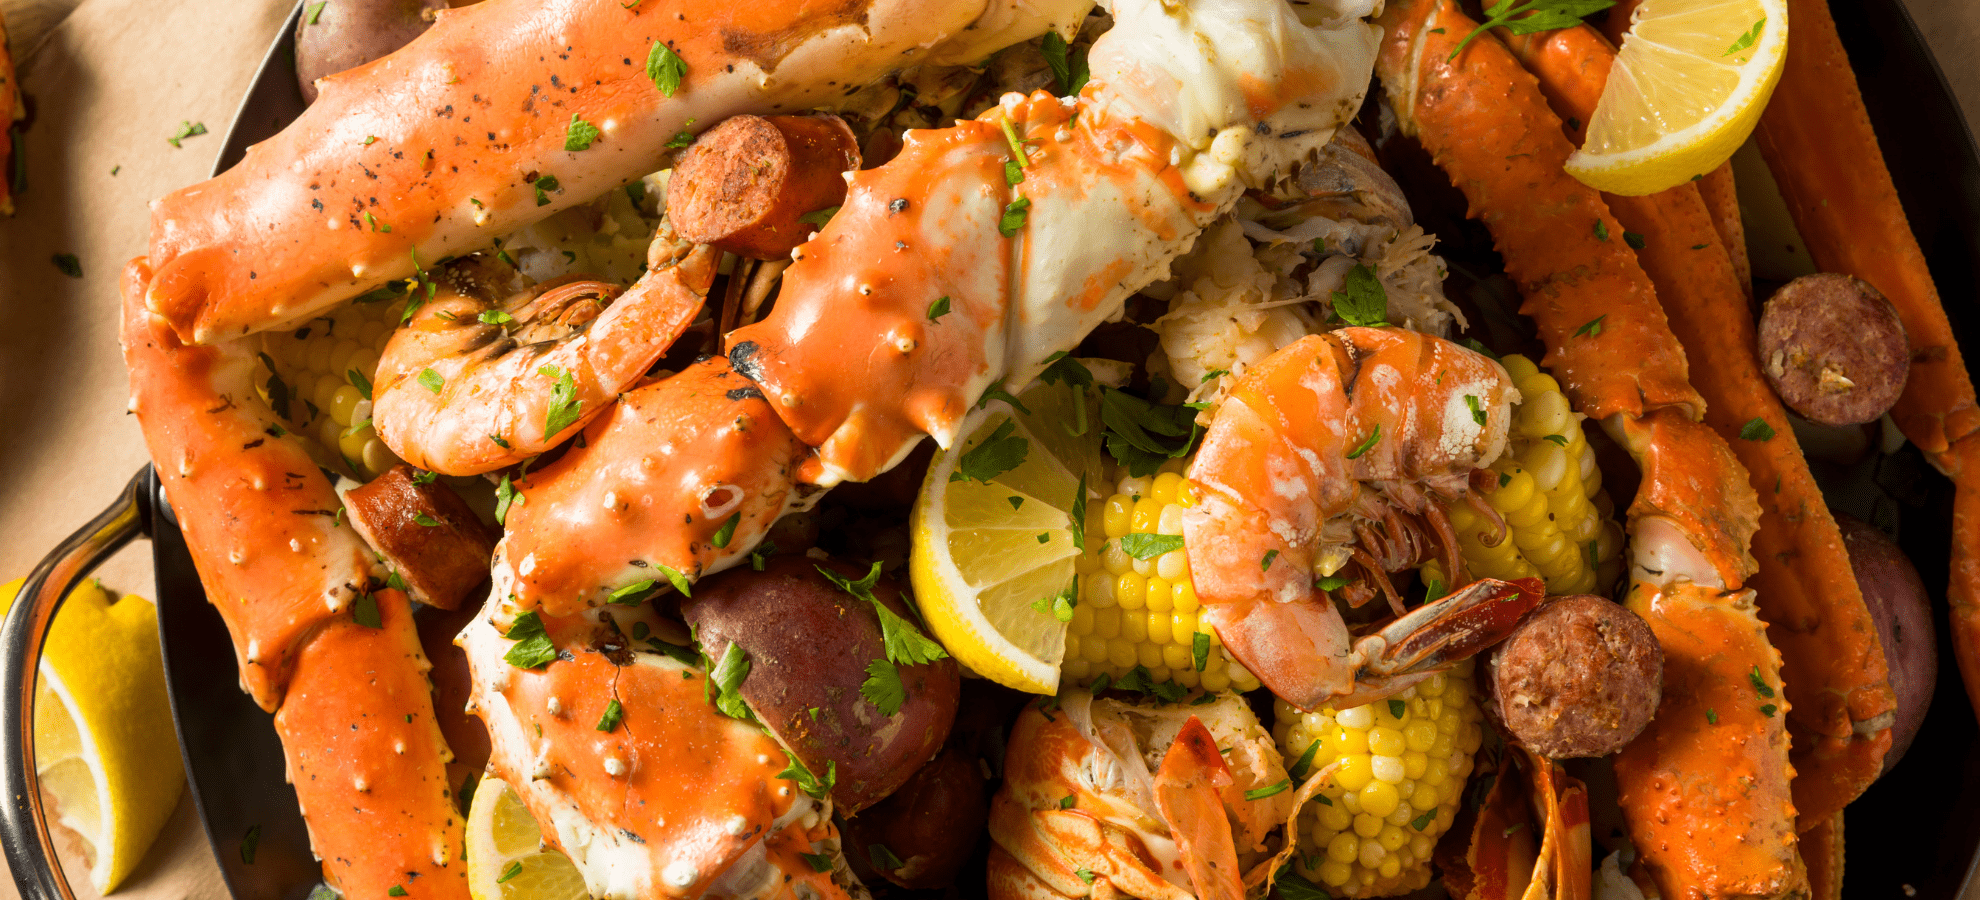 a dish of different types of seafood like crab, sausages, corn, potatoes